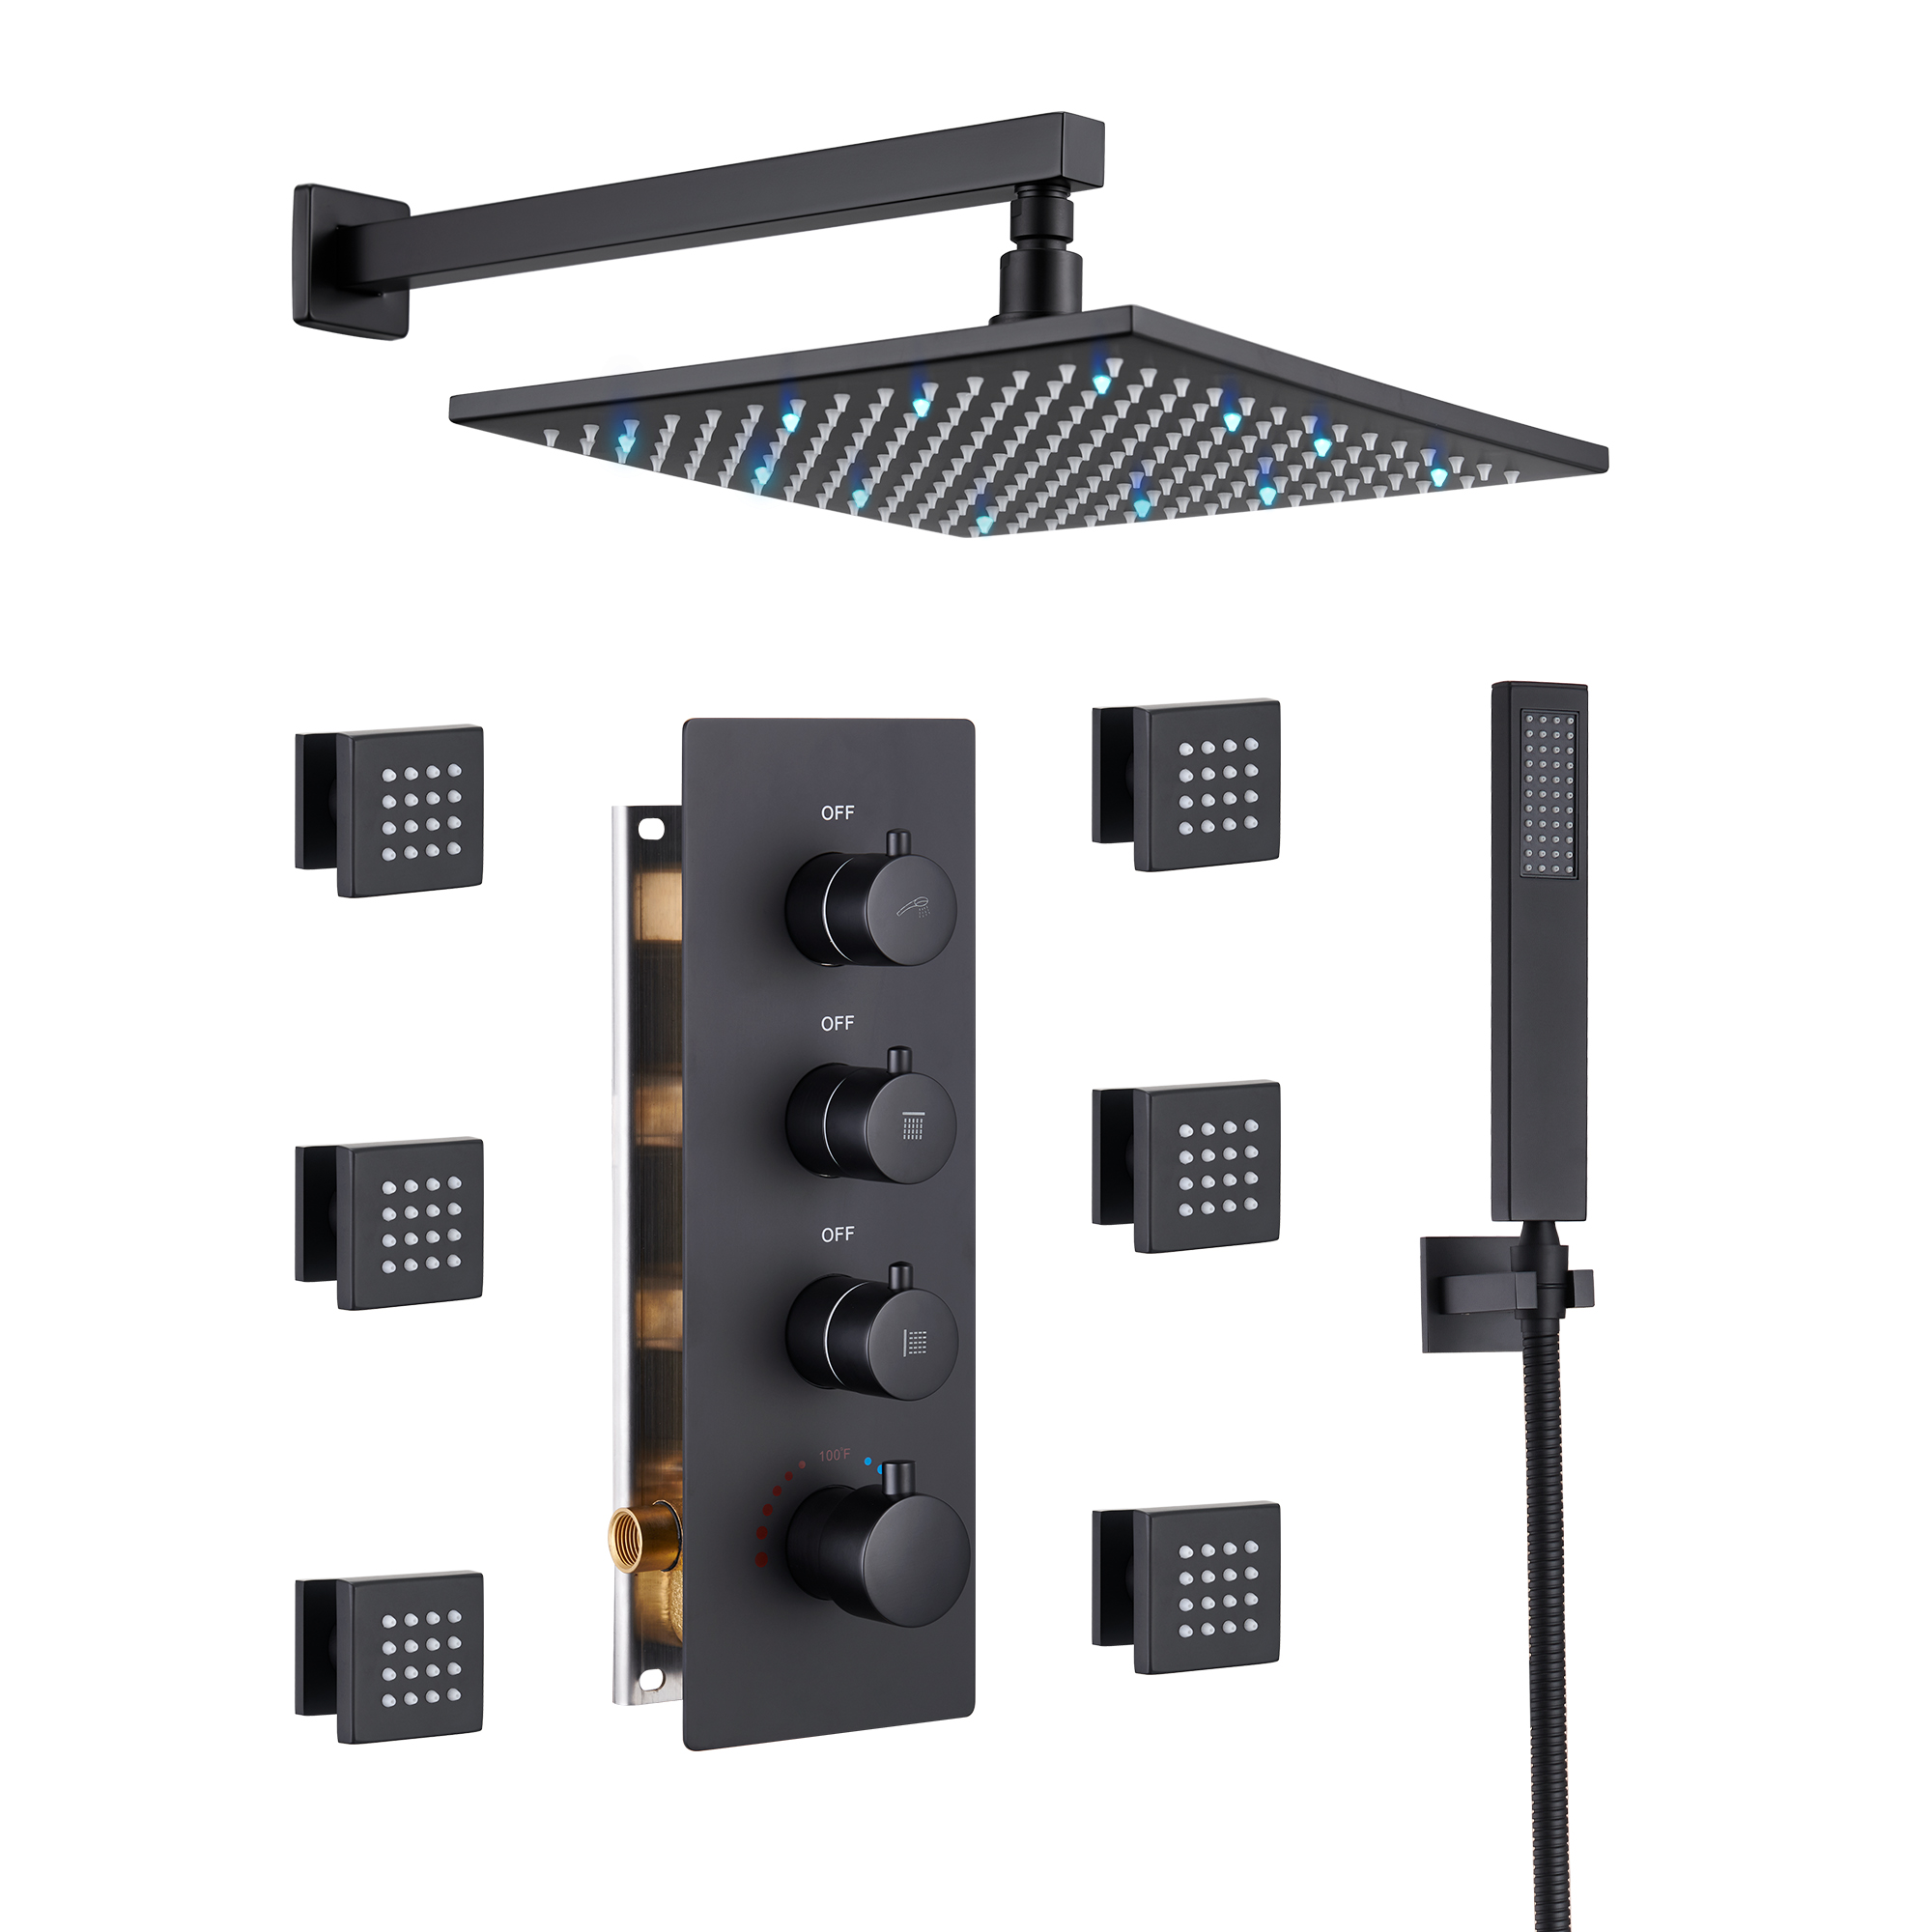 BL-Mondawe Luxury Wall Mount Rain Shower Head with 6 Shower Jet and LED 3-Spray Patterns Thermostatic 12 in. -Mondawe